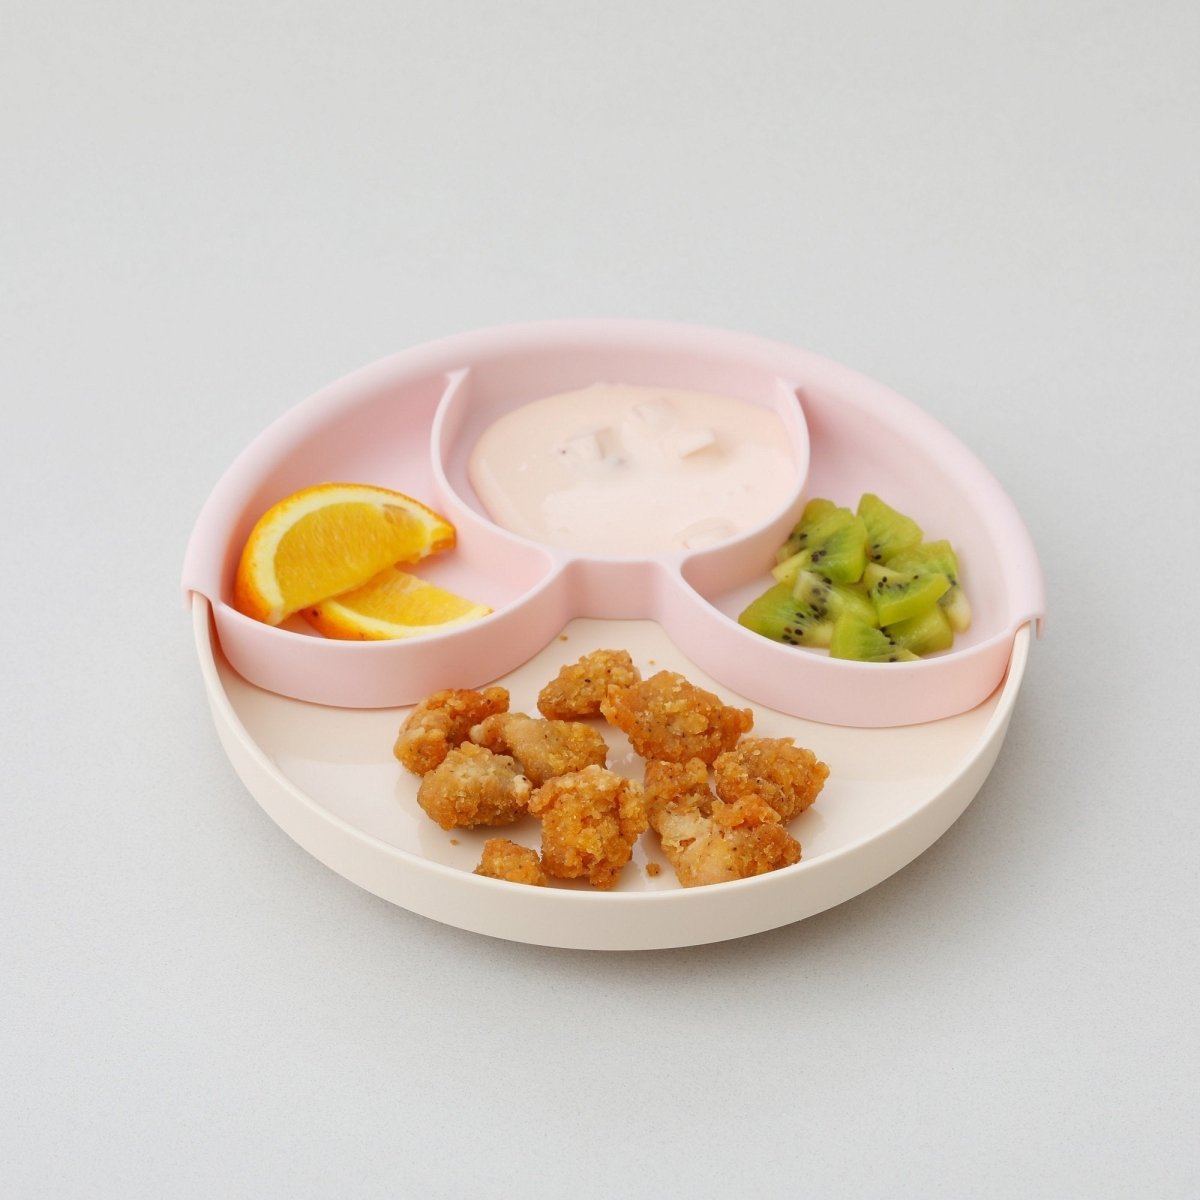 Healthy Meal Suction Plate Set - Cotton Candy - MWHMCC